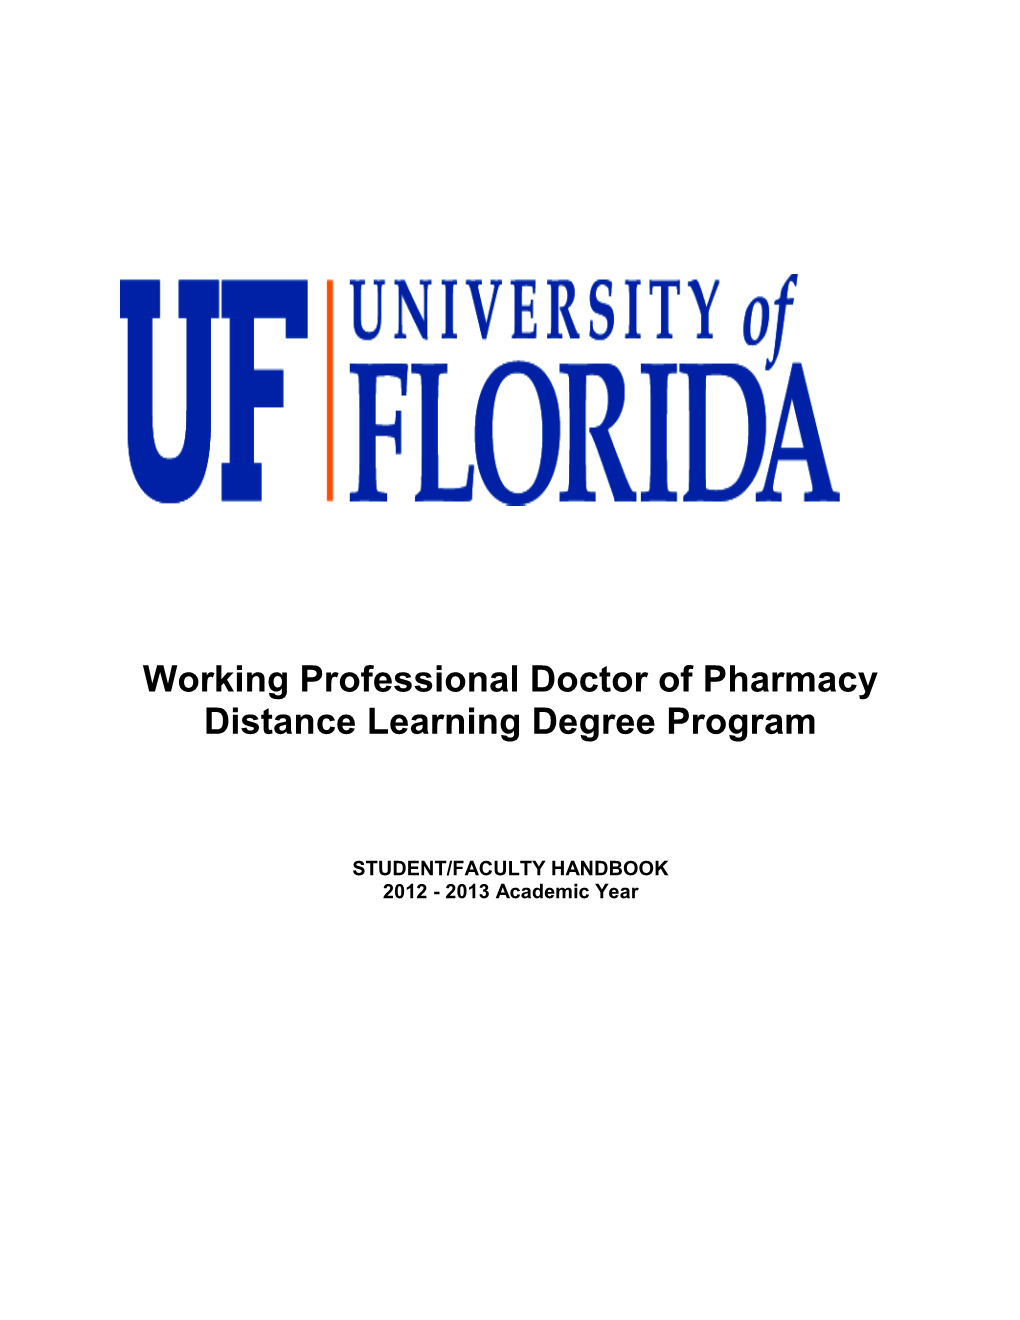 Working Professional Doctor of Pharmacy Distance Learning Degree Program